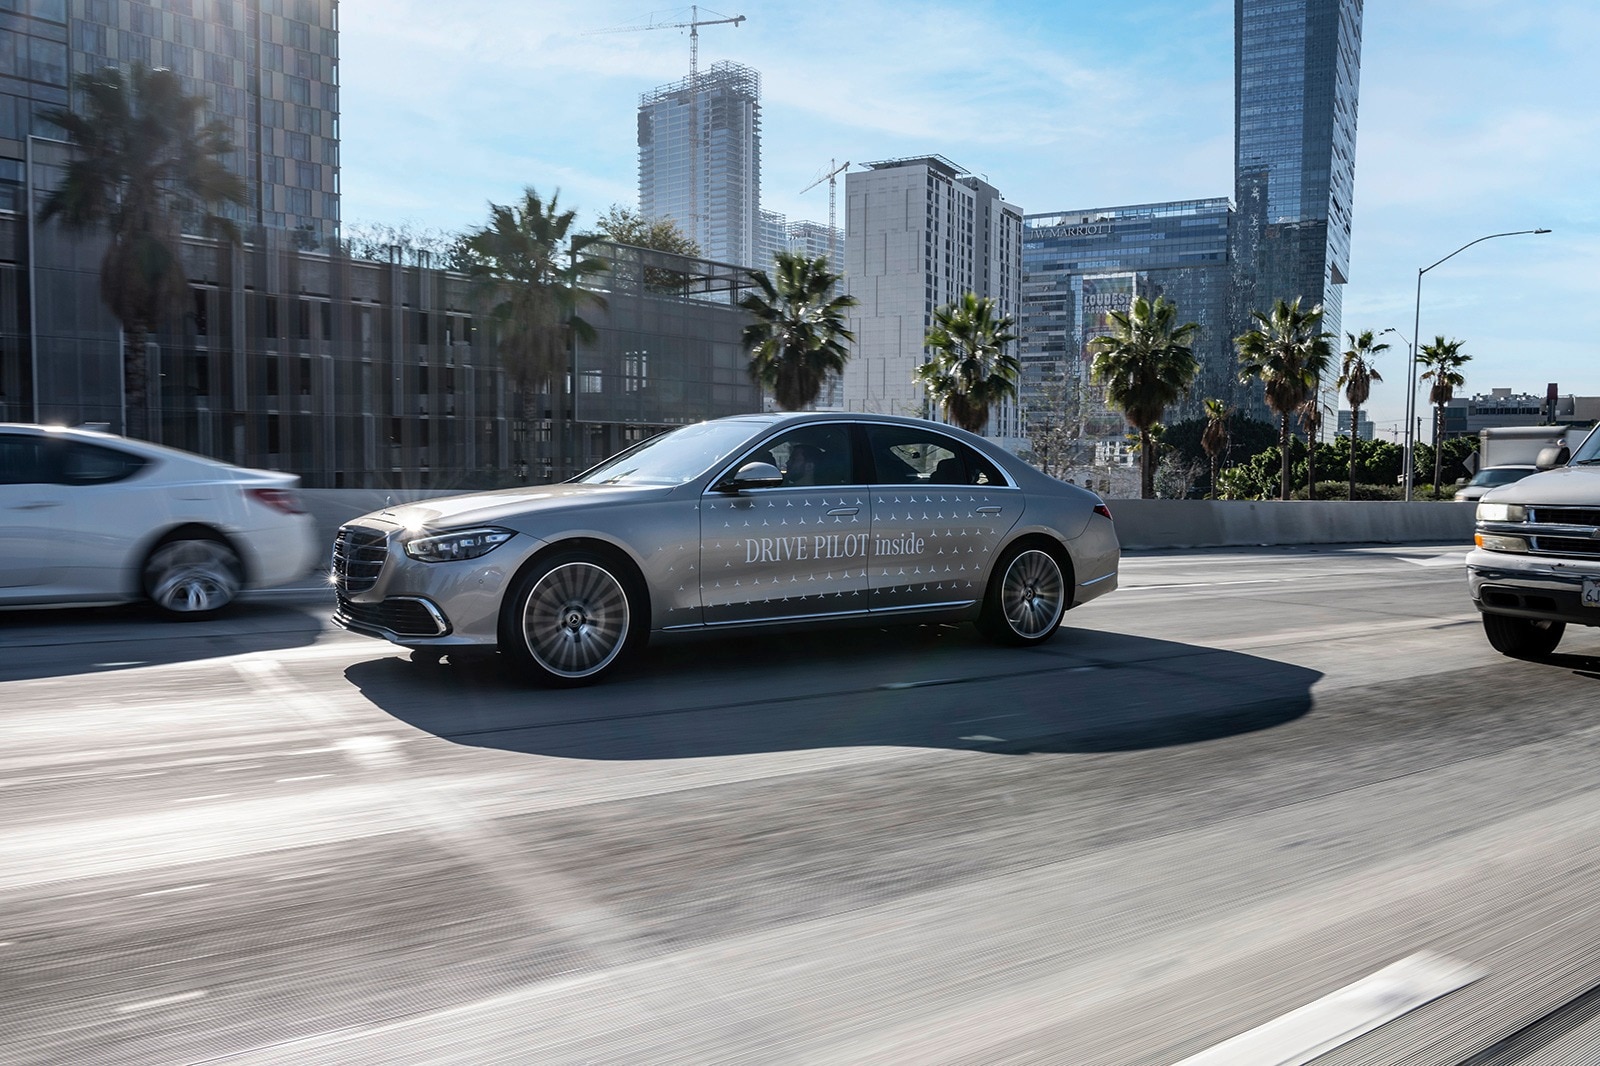 Mercedes-Benz Inches Us Closer to a Driverless Future With Level 3 Drive Pilot System